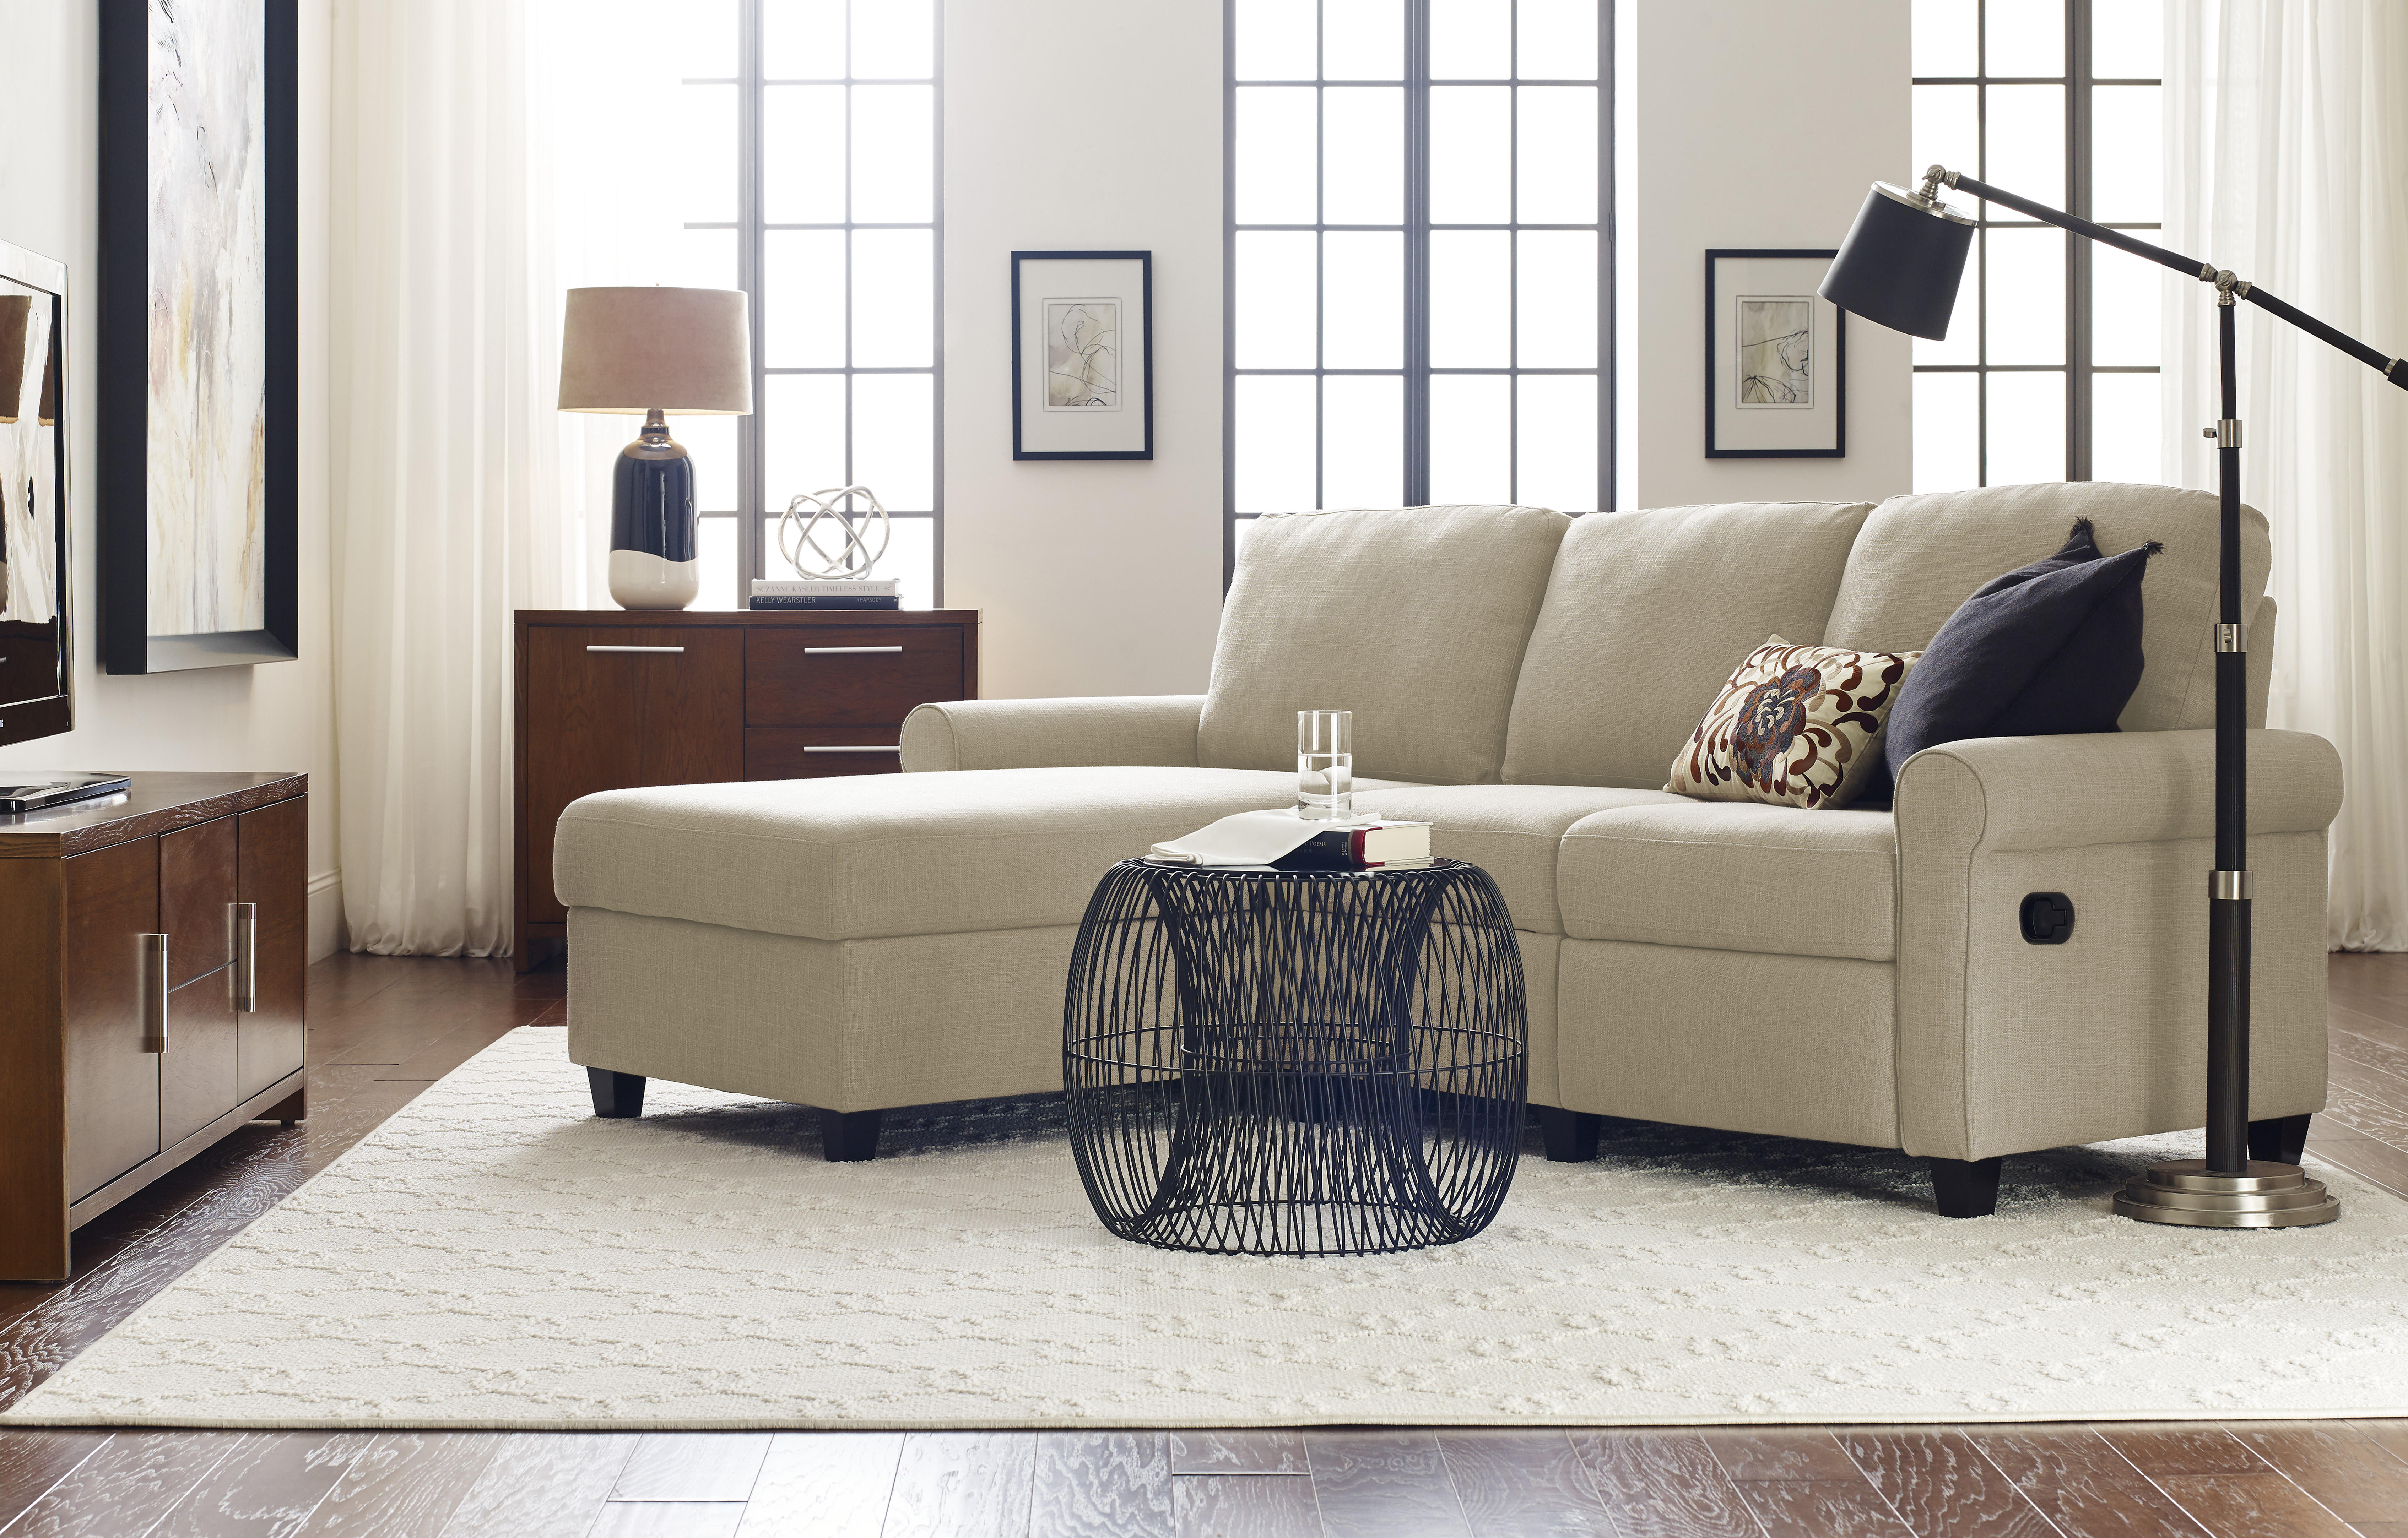 Serta Copenhagen Reclining Sectional with Left Storage Chaise - Oatmeal - image 4 of 9